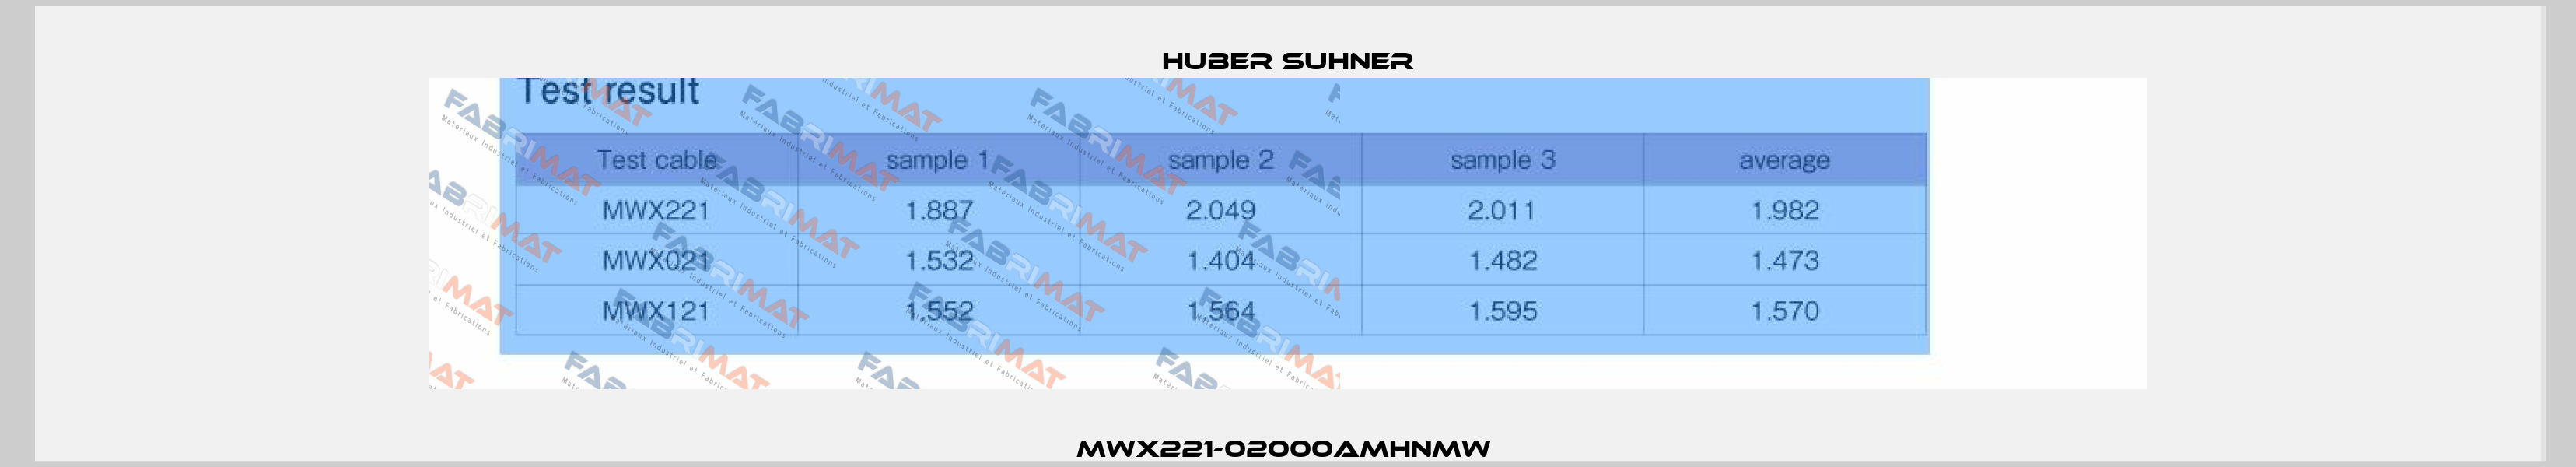 MWX221-02000AMHNMW  Huber Suhner